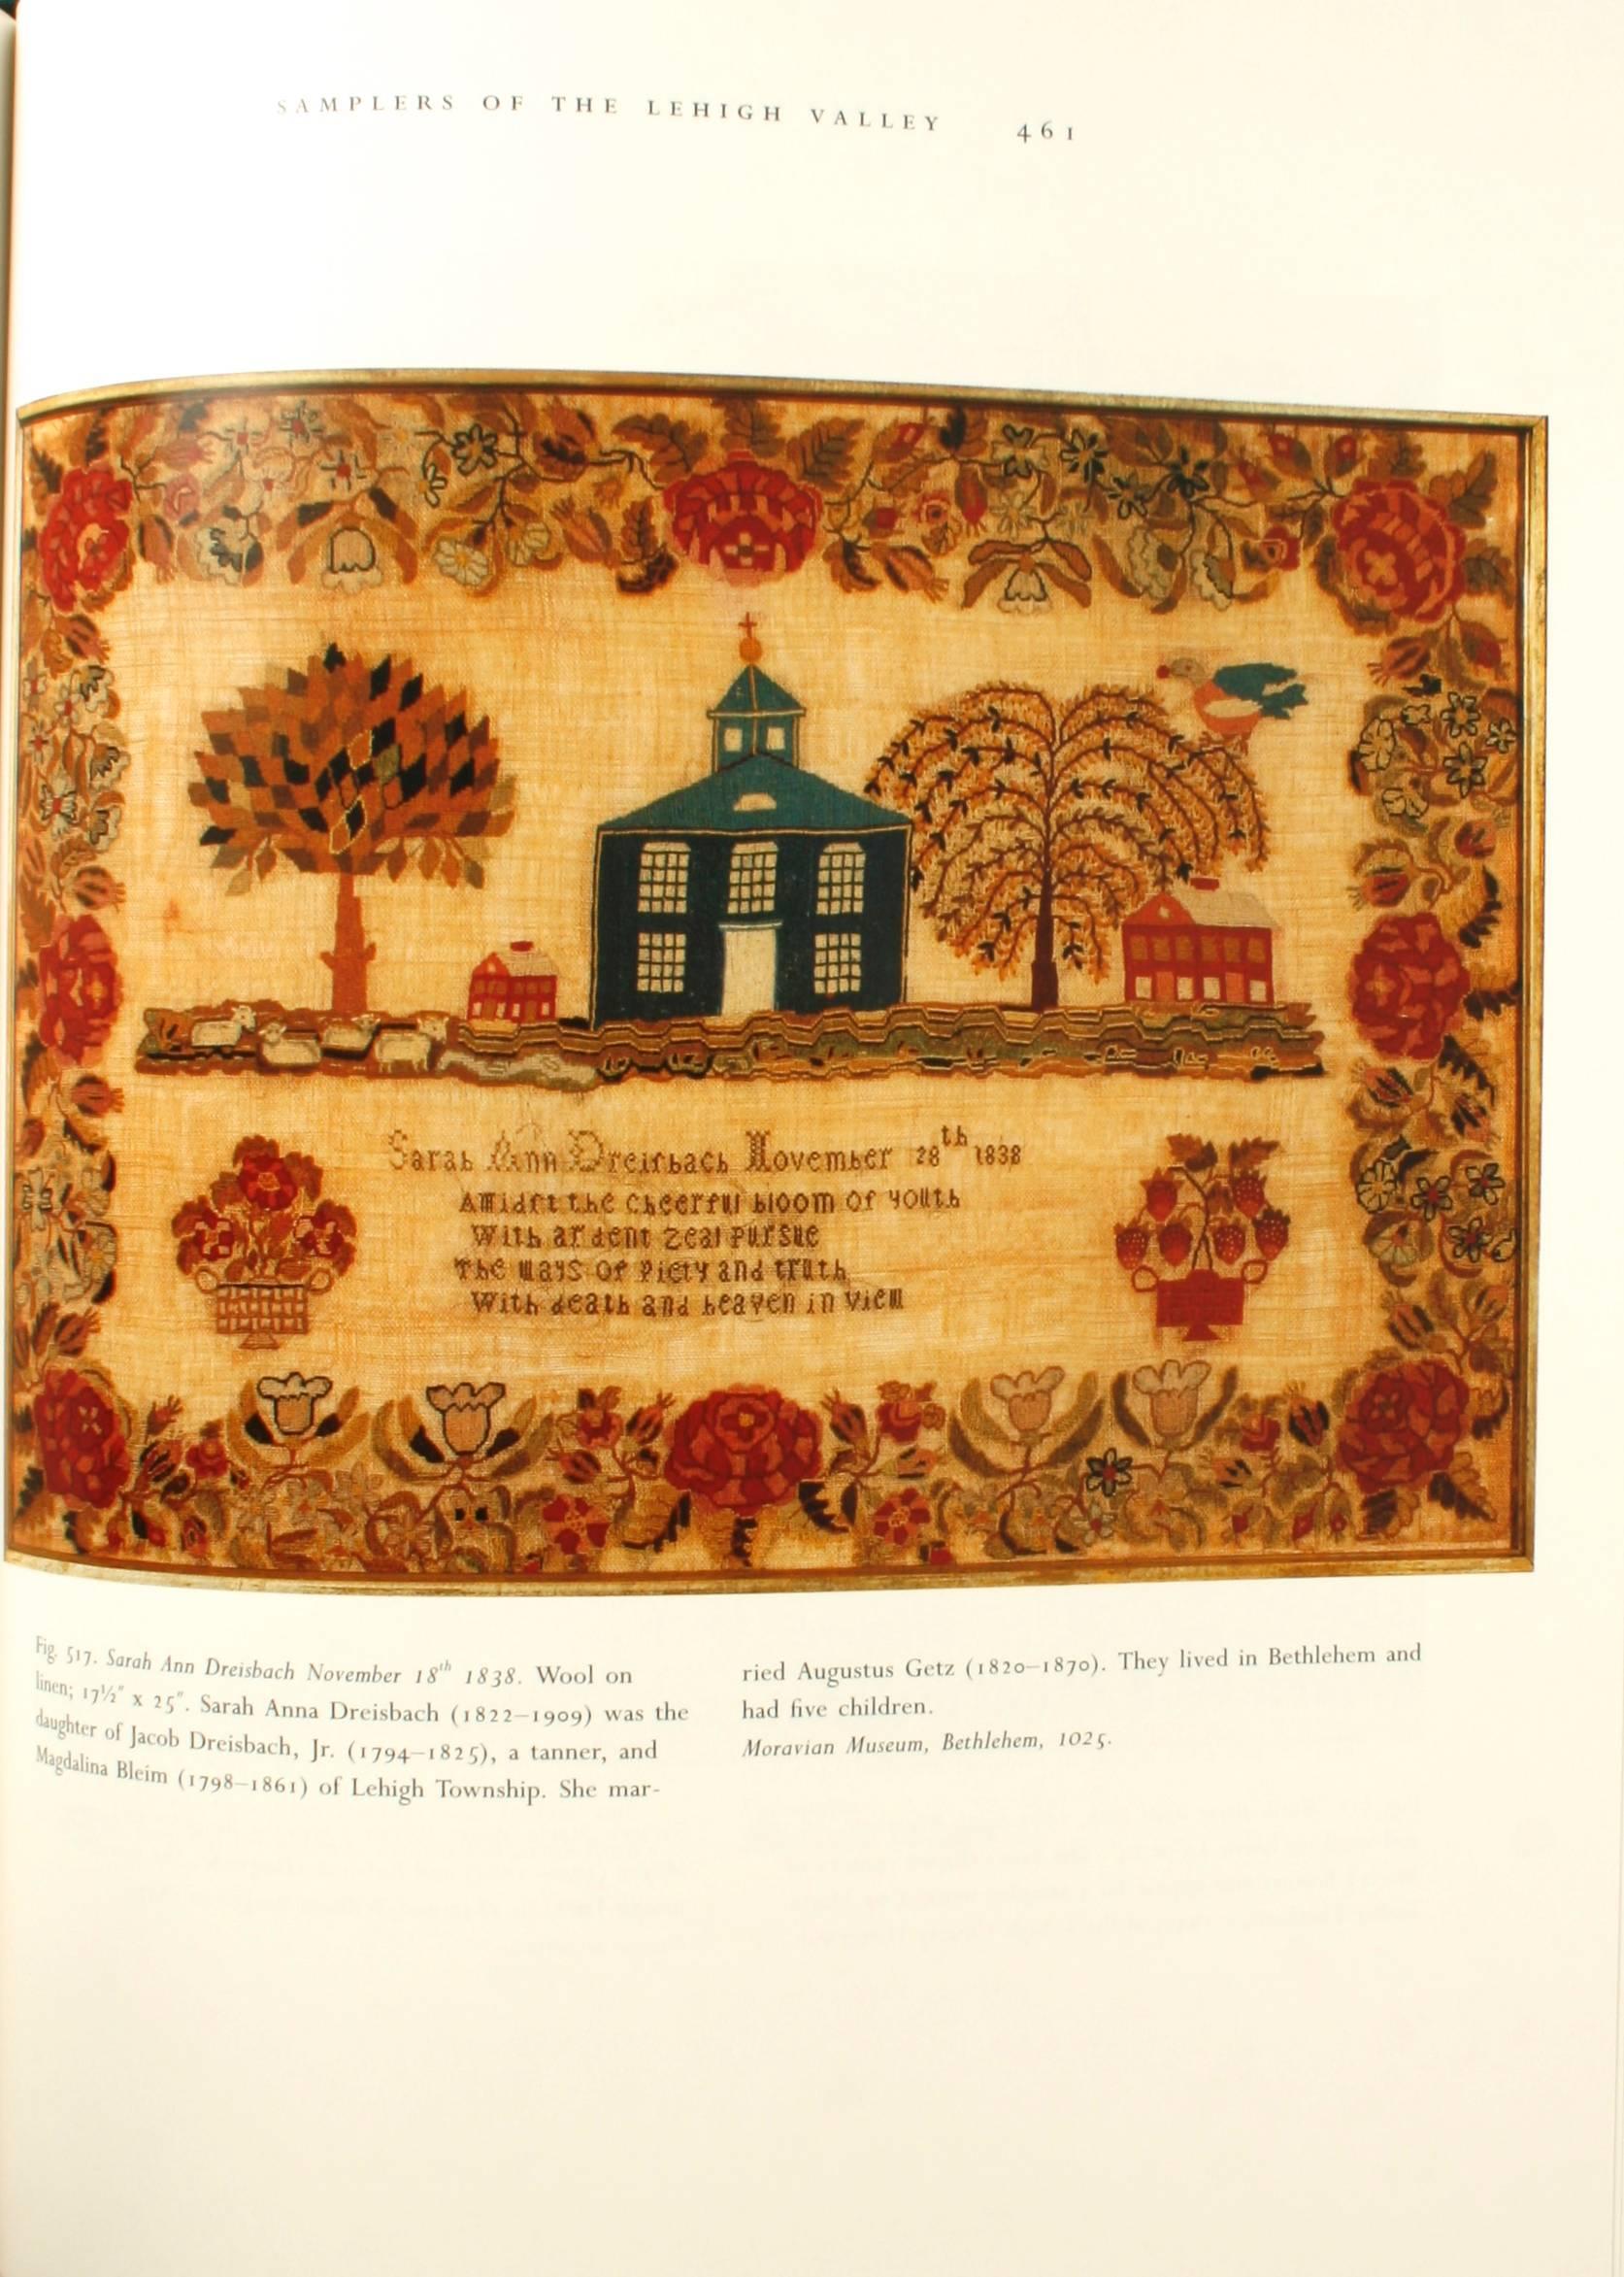 Paper Girlhood Embroidery, American Samplers and Pictorial Needlework, 1650-1850 For Sale